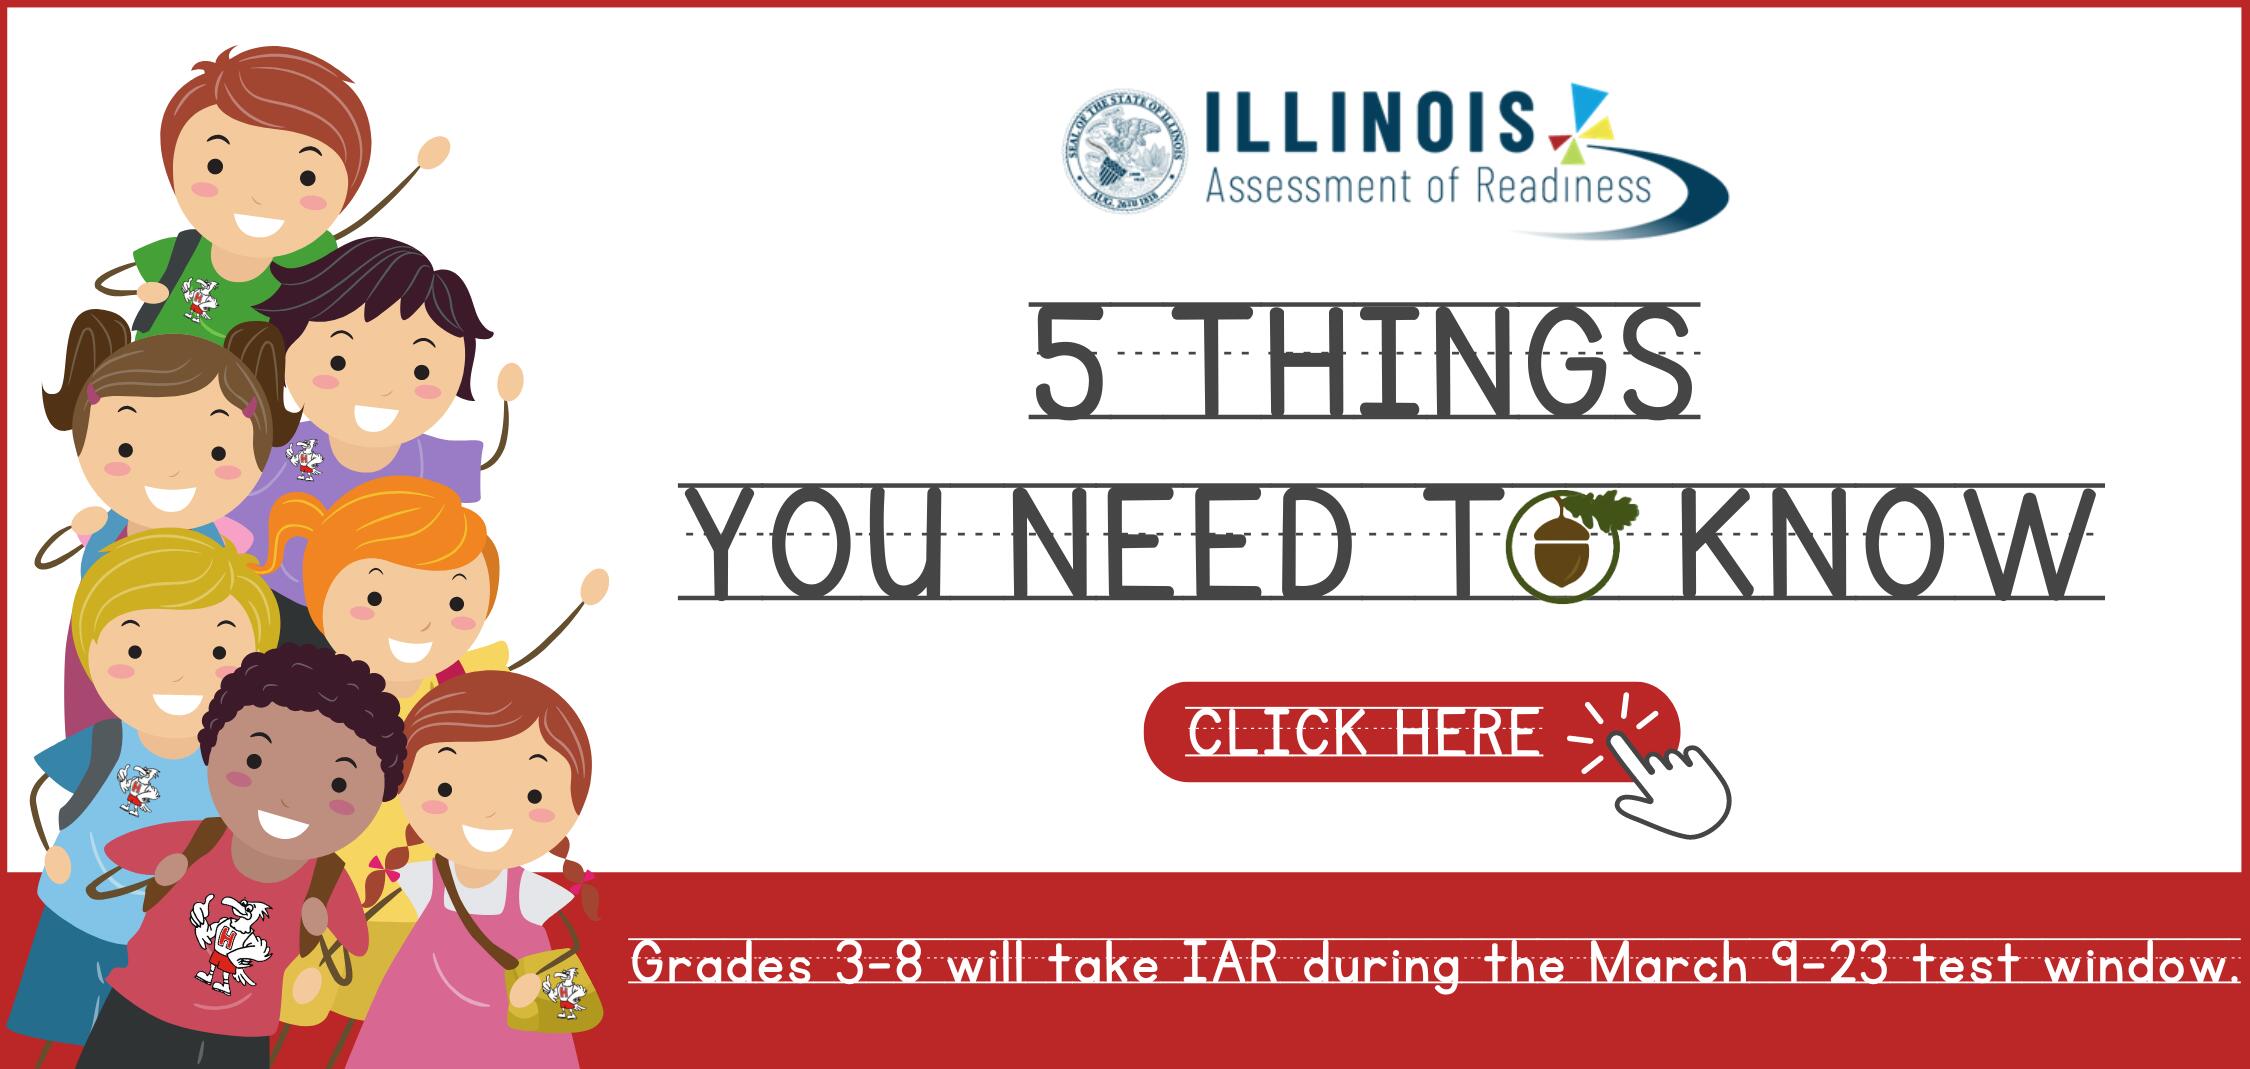 5 Things to Know About IAR